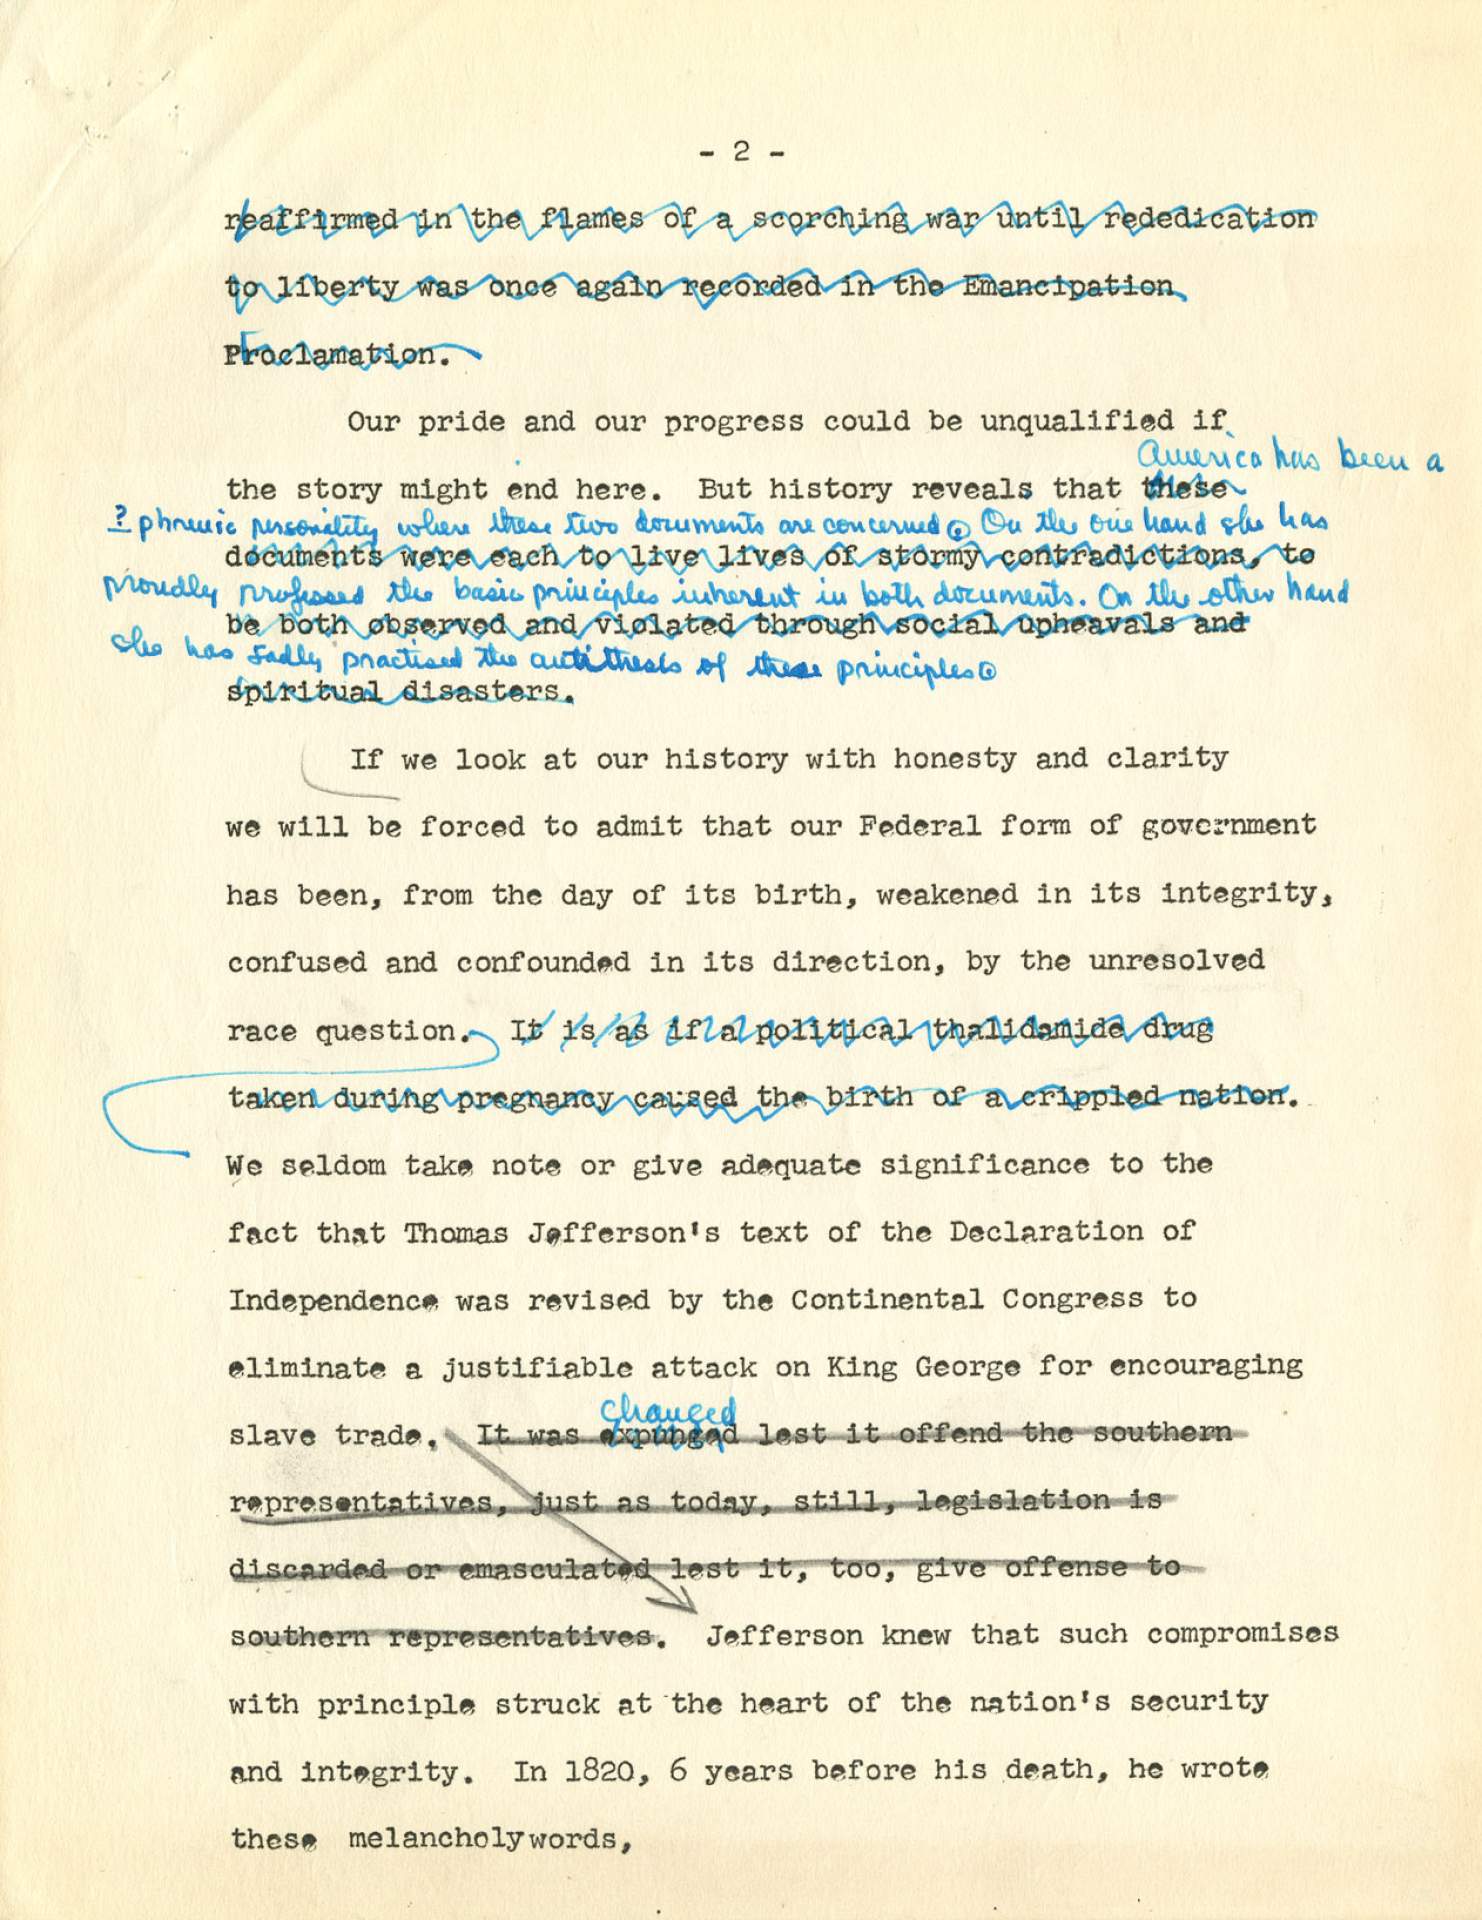 Manuscript of a speech written and delivered in New York City in September 1962 by Rev. Dr. Martin Luther King, Jr. for the Proclamation’s centennial